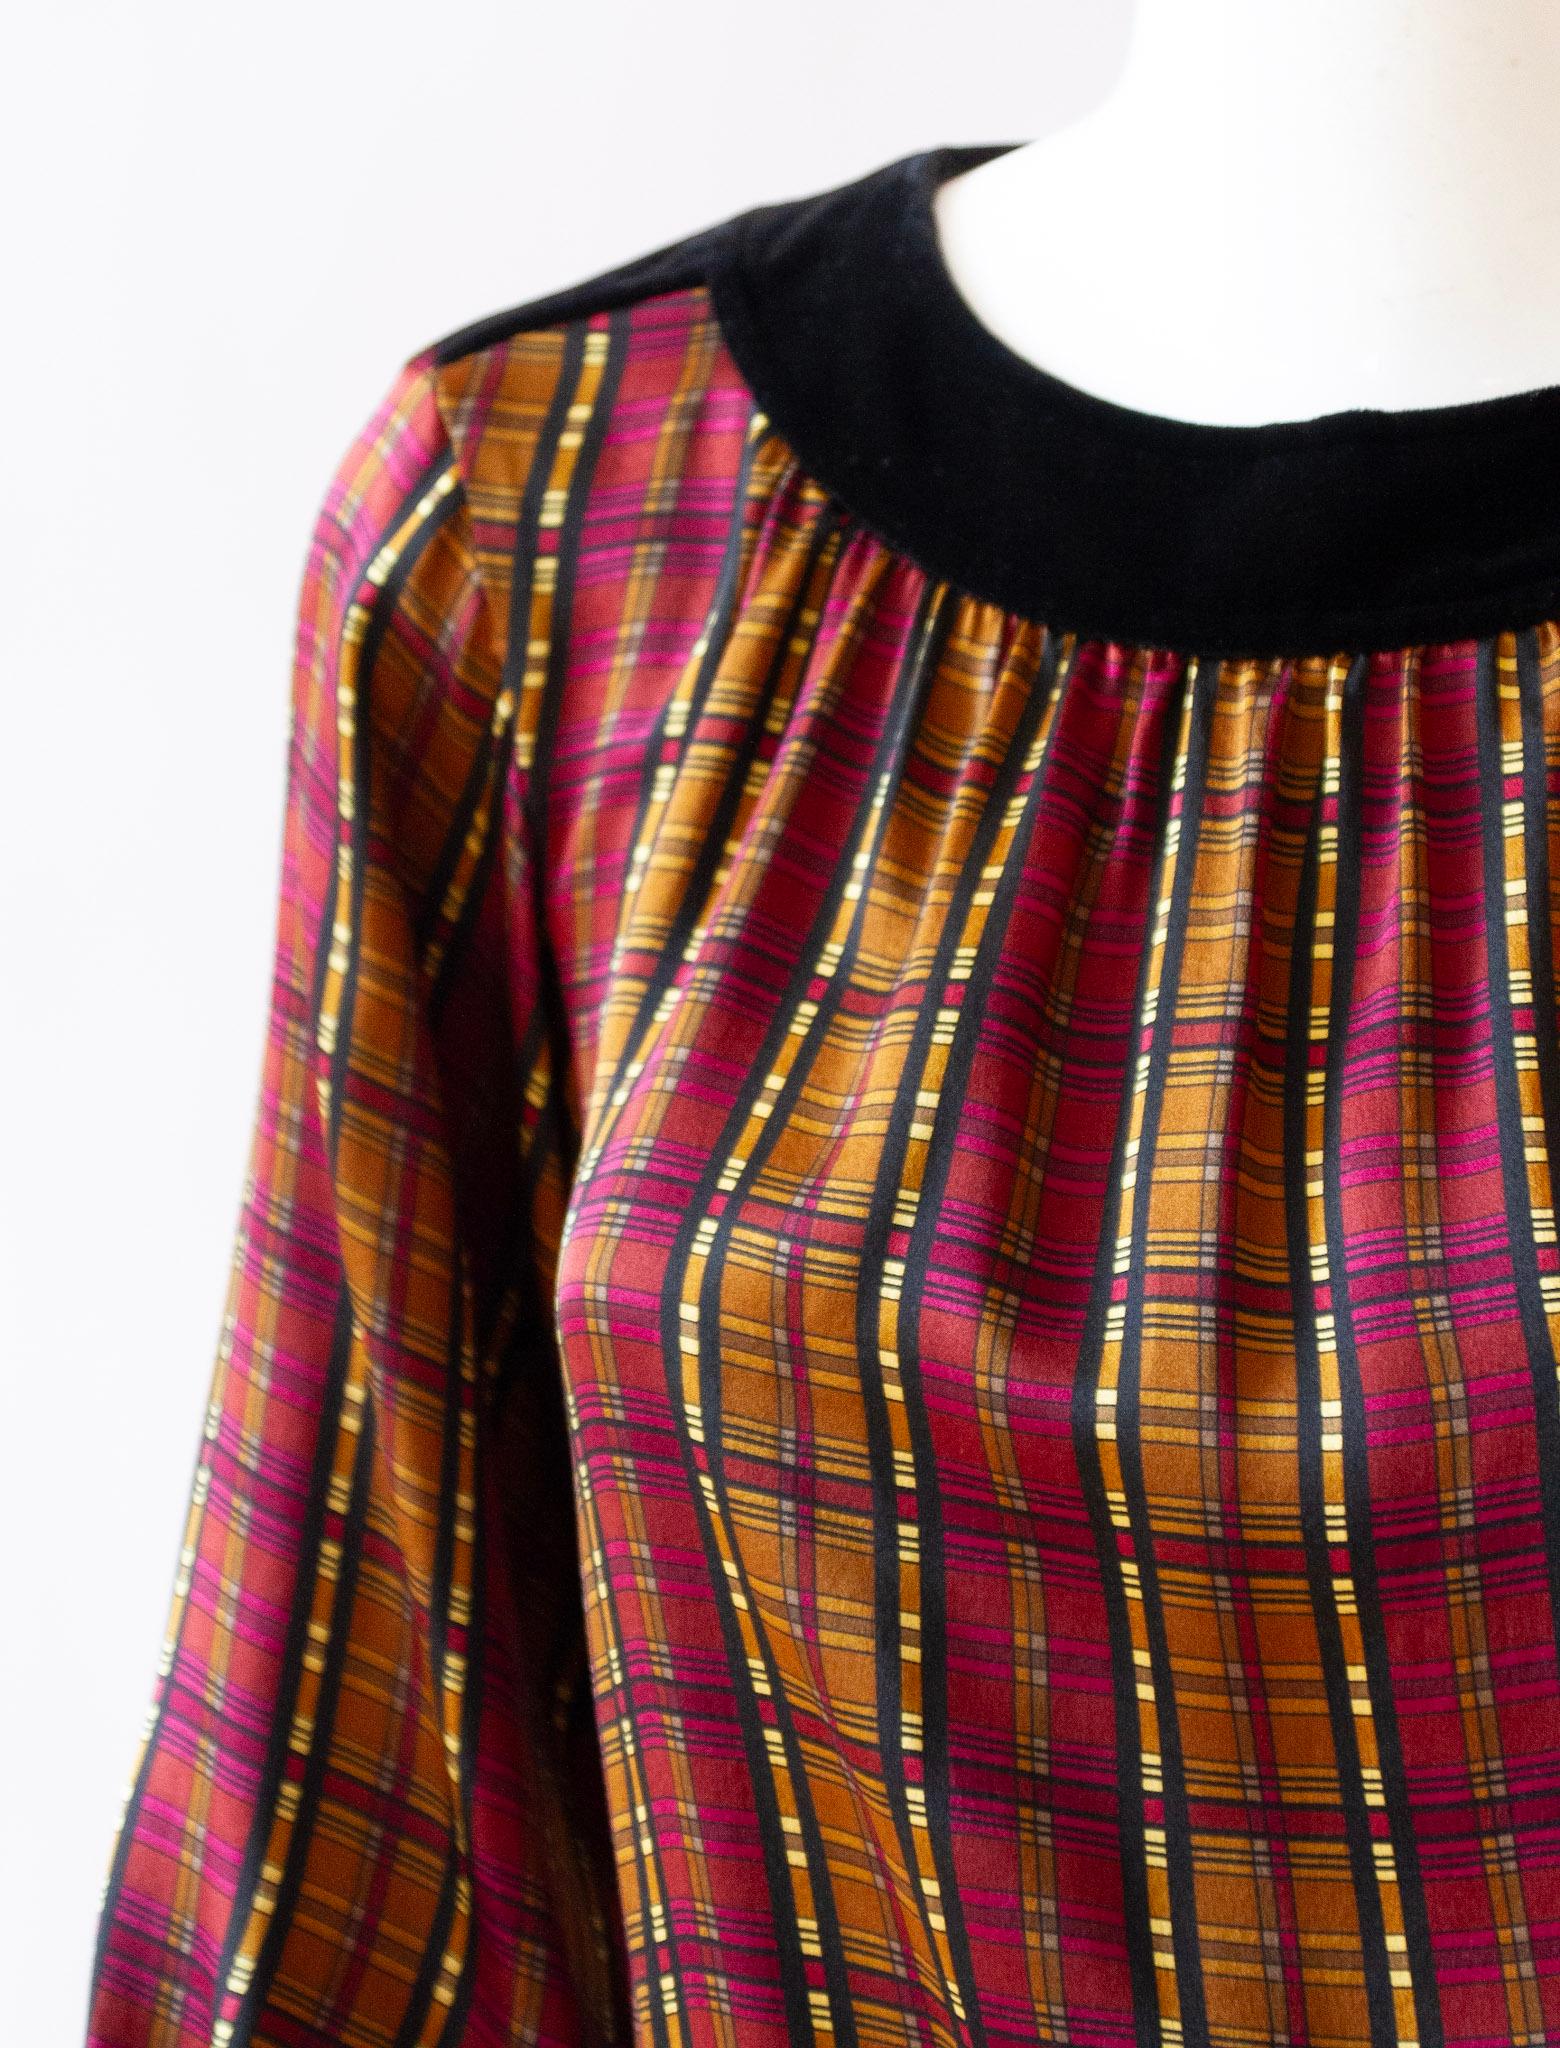 Saint Laurent plaid gold and lamé silk top with balloon sleeves and velvet round neckline and velvet cuffs.

Sz 34